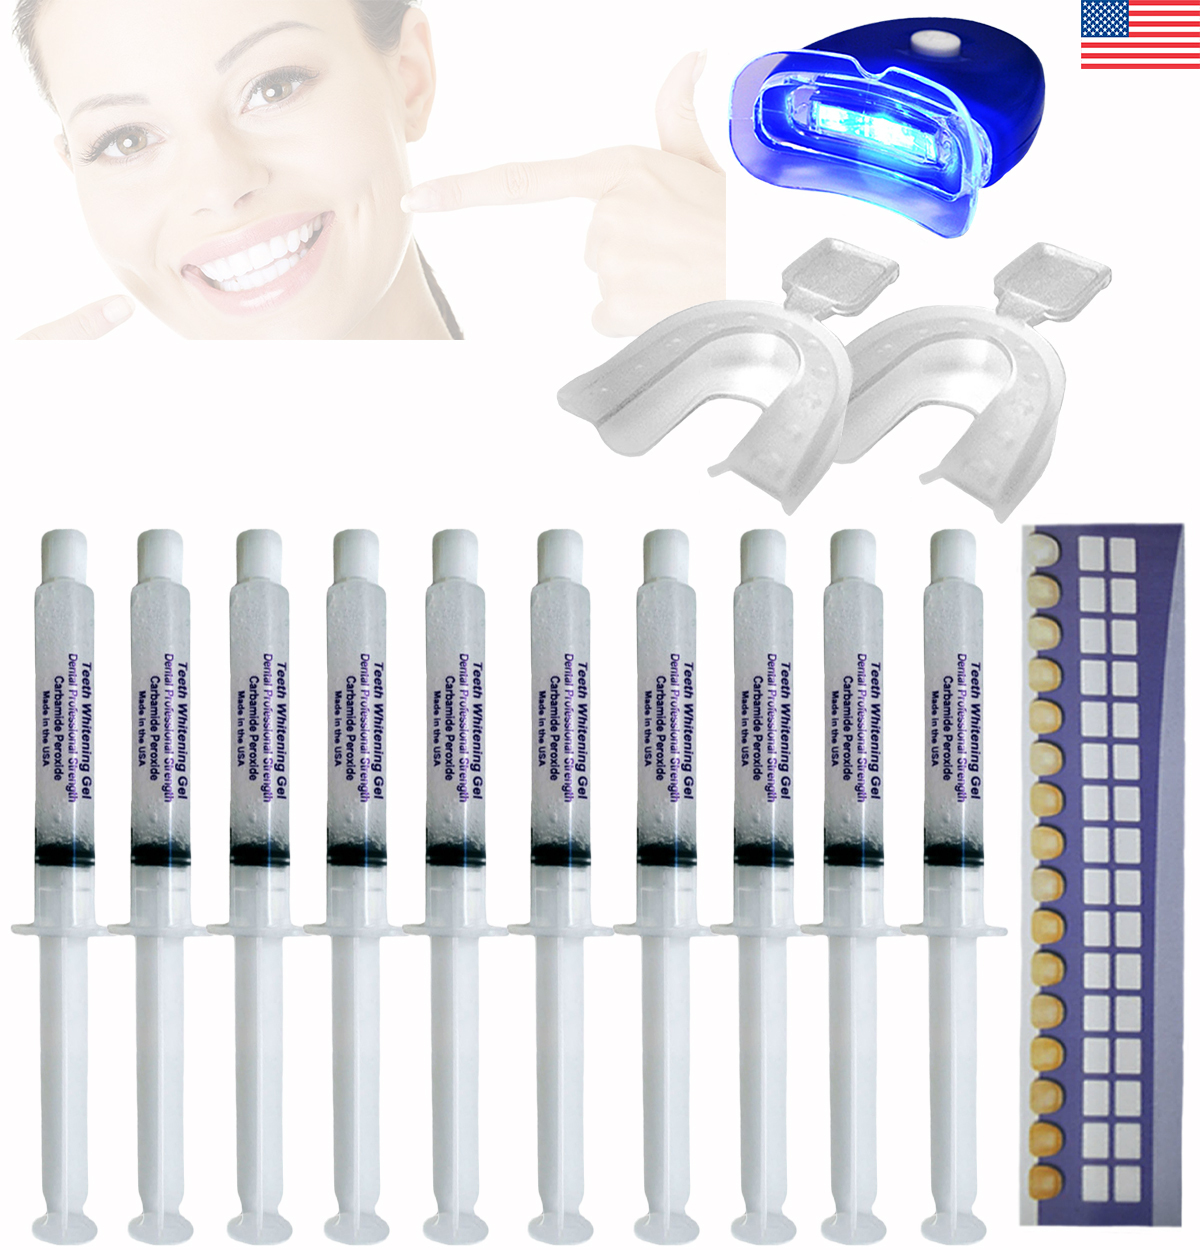 Professional Teeth Whitening Kit 44% Carbamide Peroxide Gel At Home System - USA - $15.49